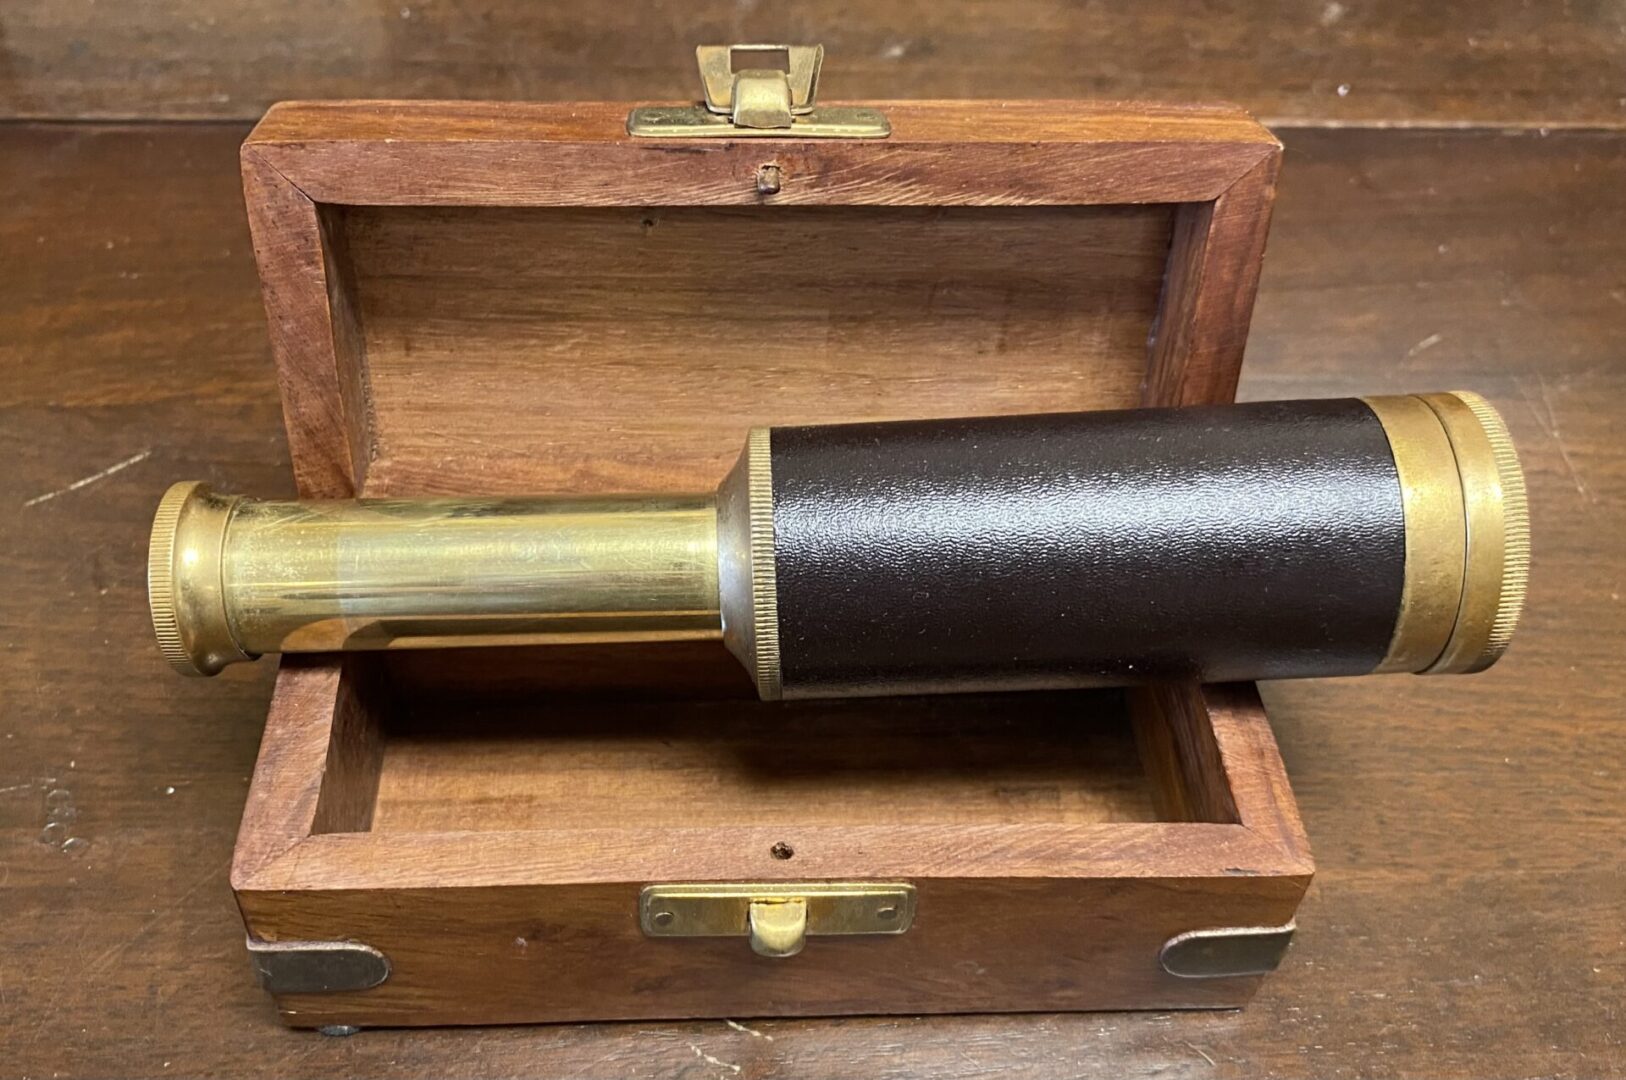 A telescope in its wooden case with the handle up.